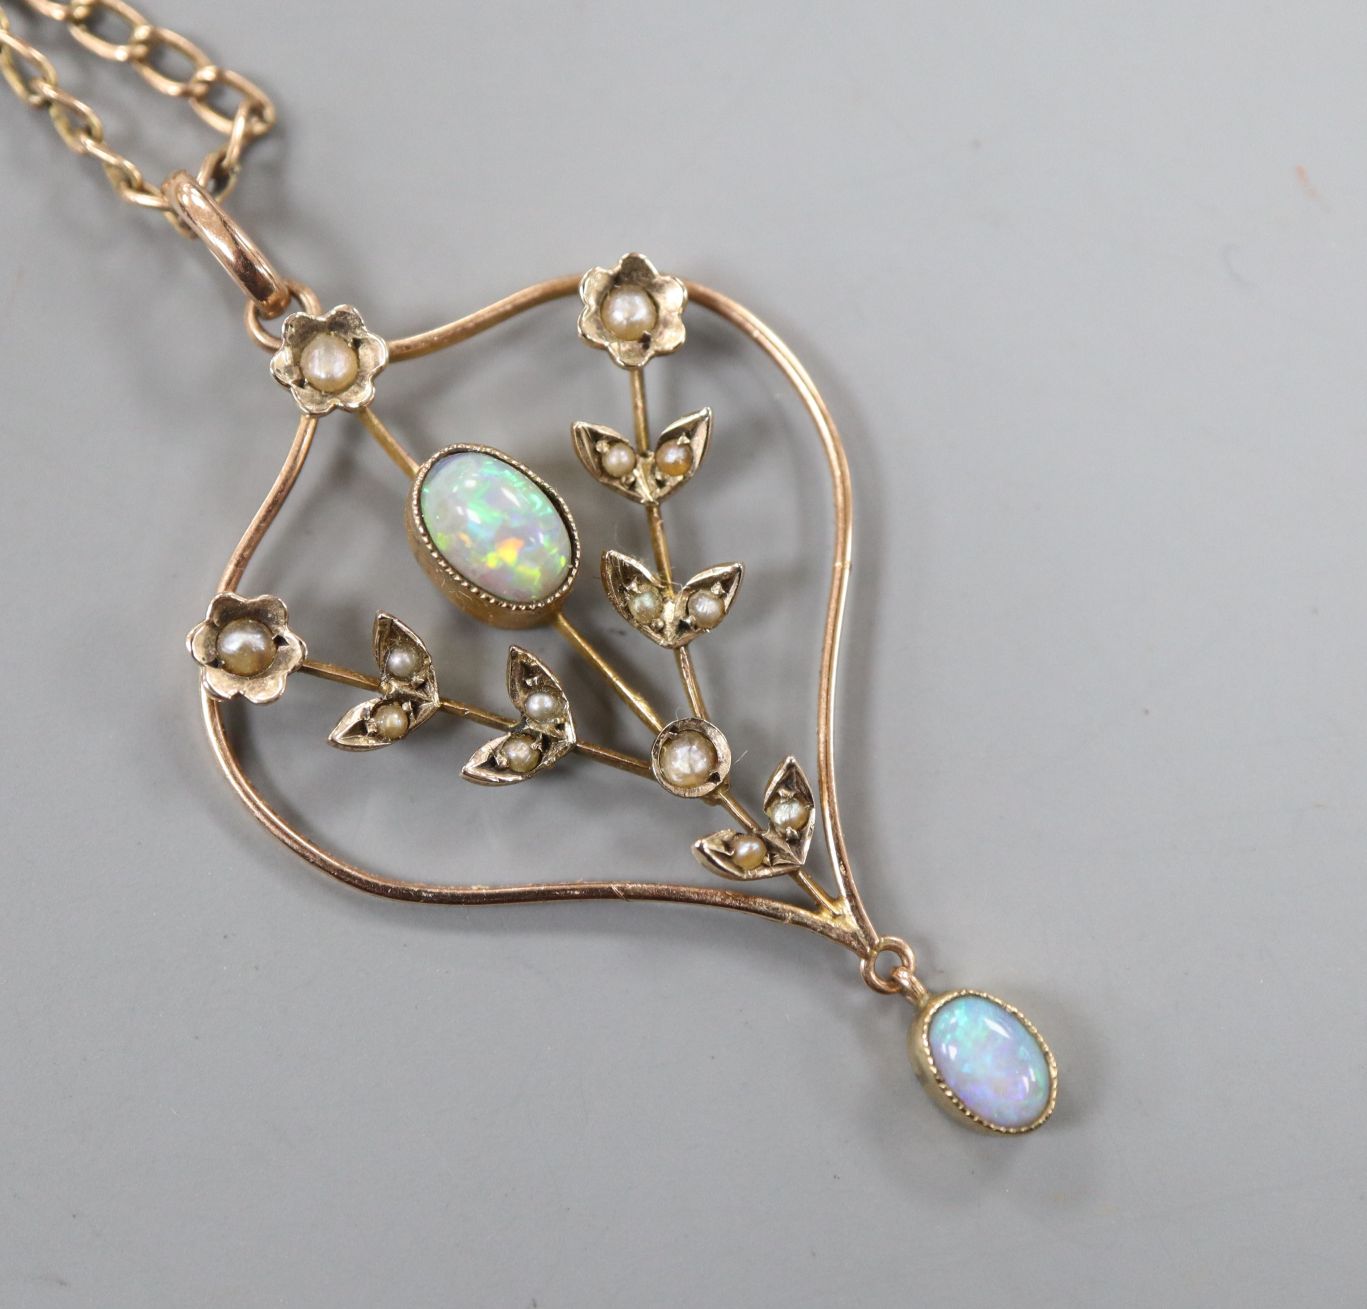 An Edwardian 9ct, white opal and seed pearl set pendant, on a gilt metal chain, pendant 37mm.